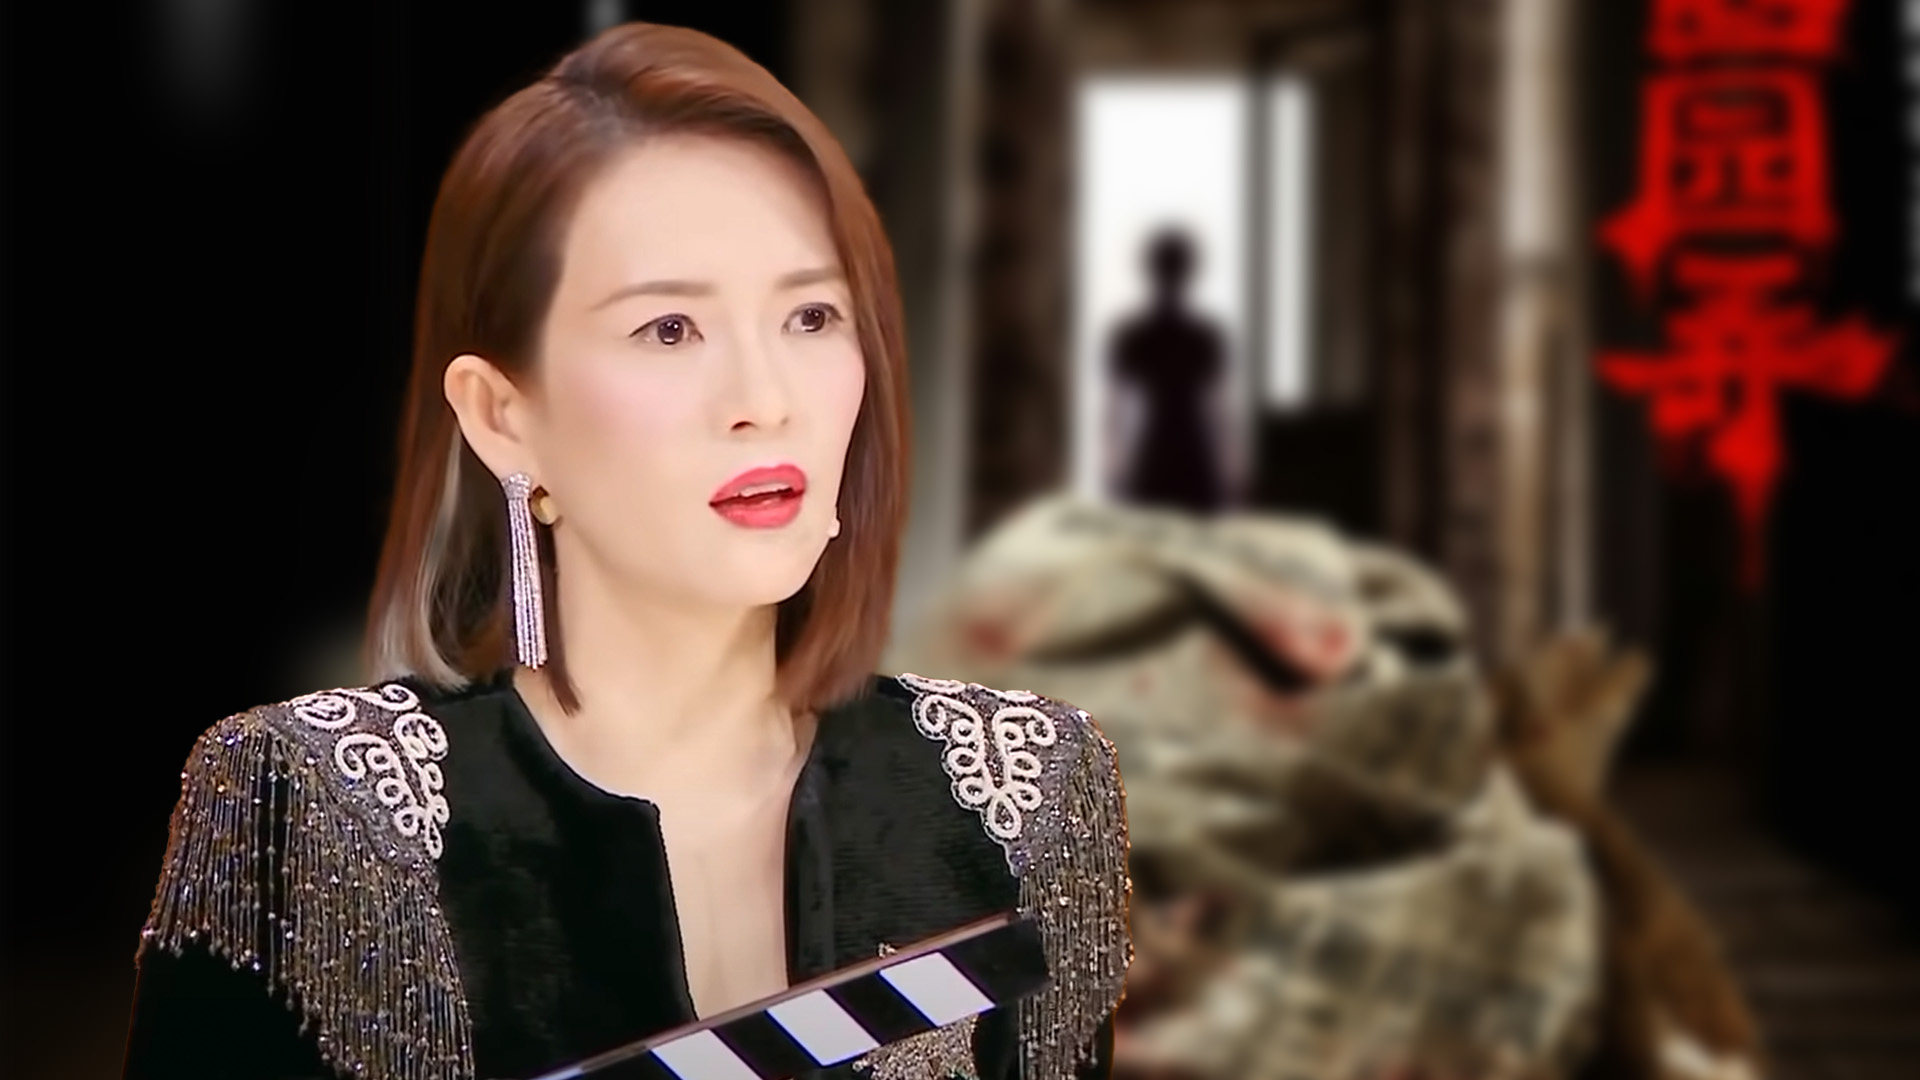 Famous China actress Zhang Ziyi has lashed out at an online observer who claimed she needs the help of younger, popular actors to boost her appeal at the box office. Photo: SCMP composite/Weibo/YouTube